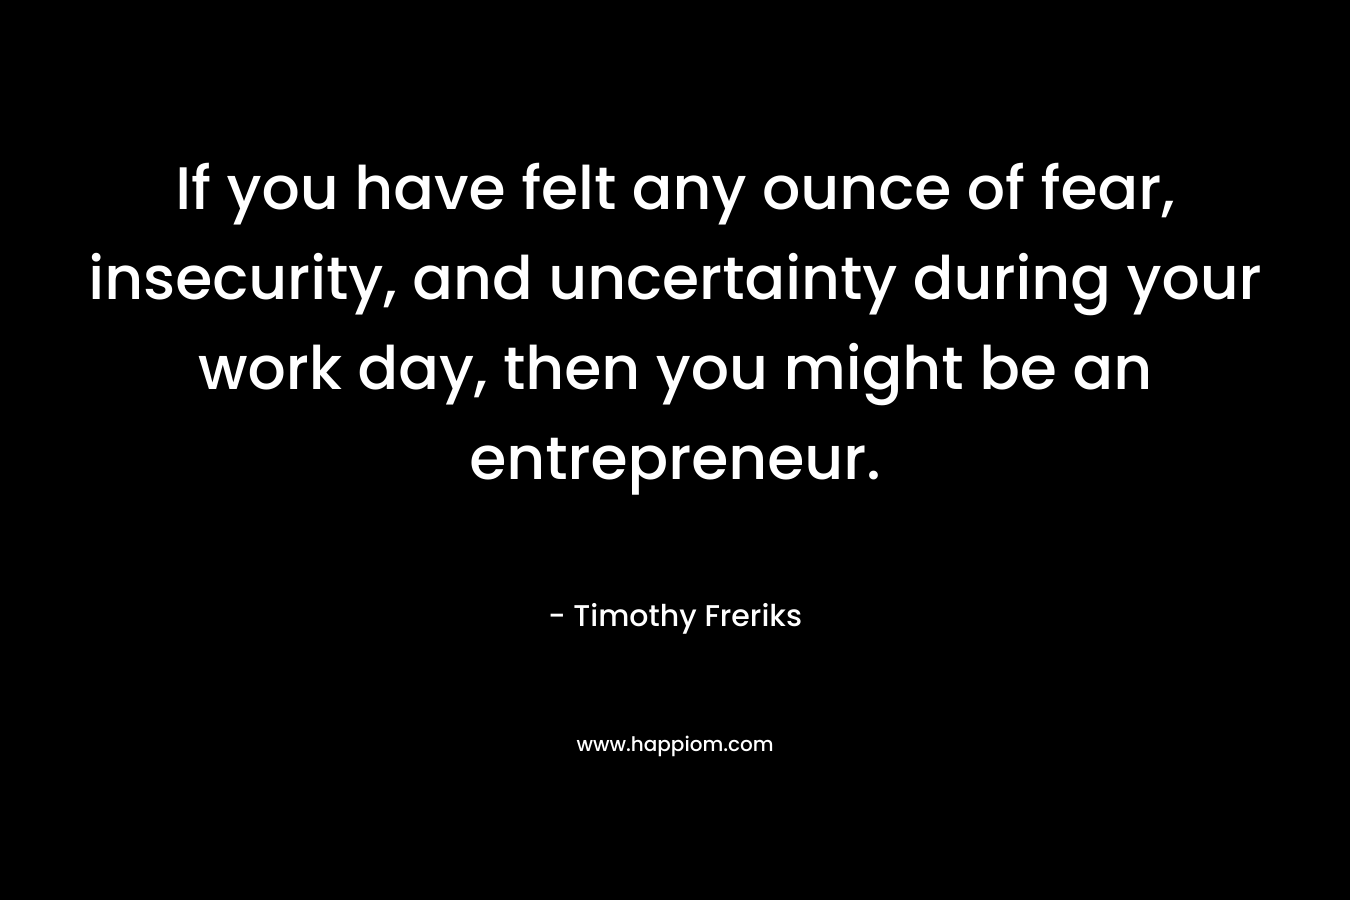 If you have felt any ounce of fear, insecurity, and uncertainty during your work day, then you might be an entrepreneur. – Timothy Freriks